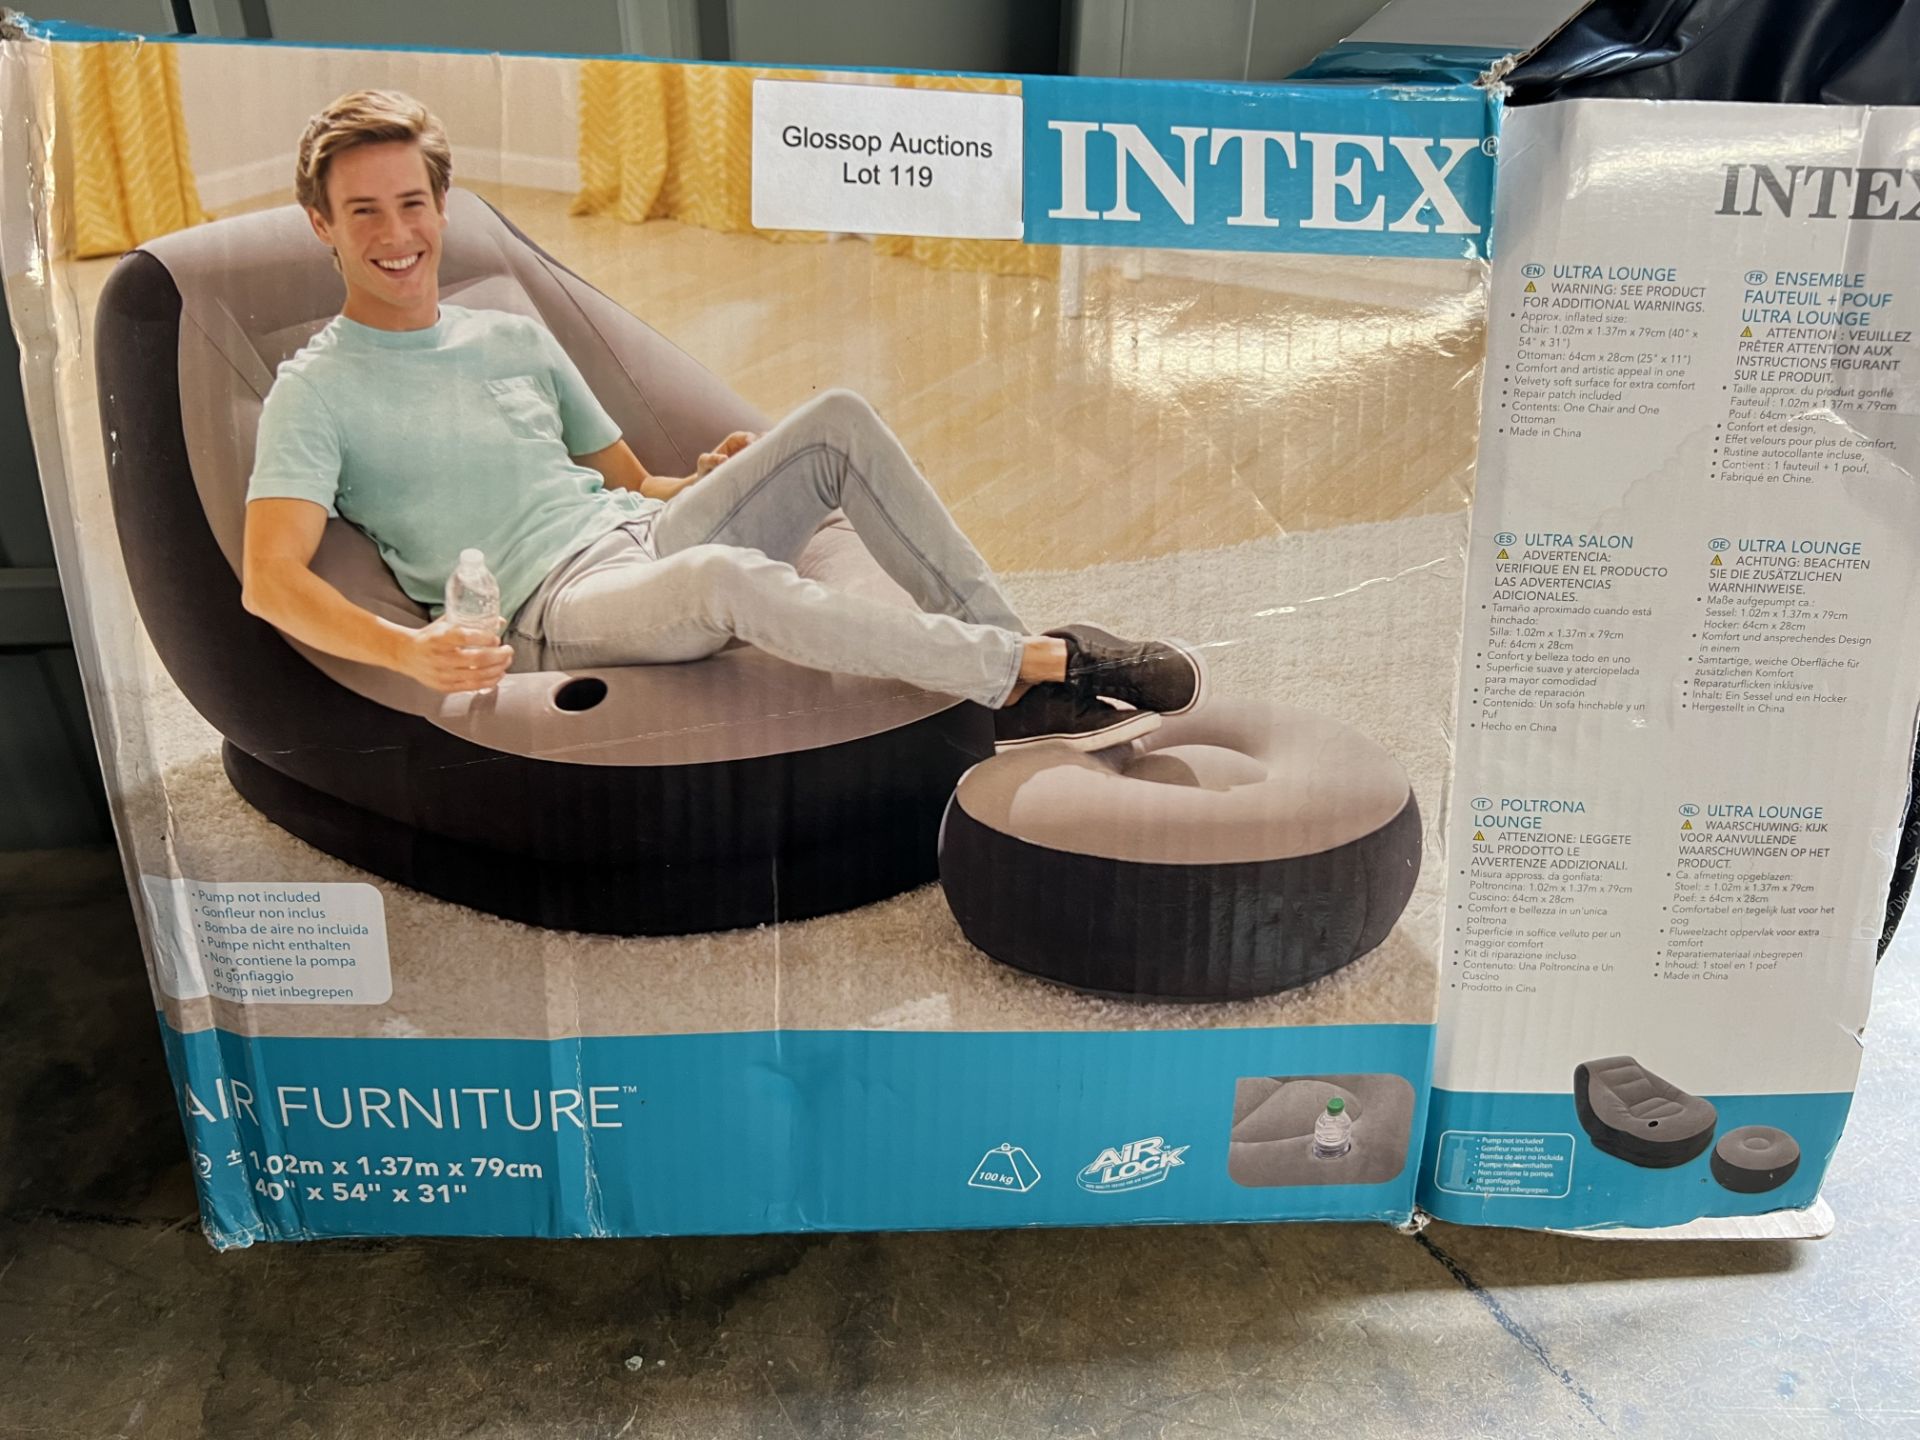 Intex - Lounge chair inflatable grey/black. RRP £49.99 - GRADE U Intex - Lounge chair inflatable